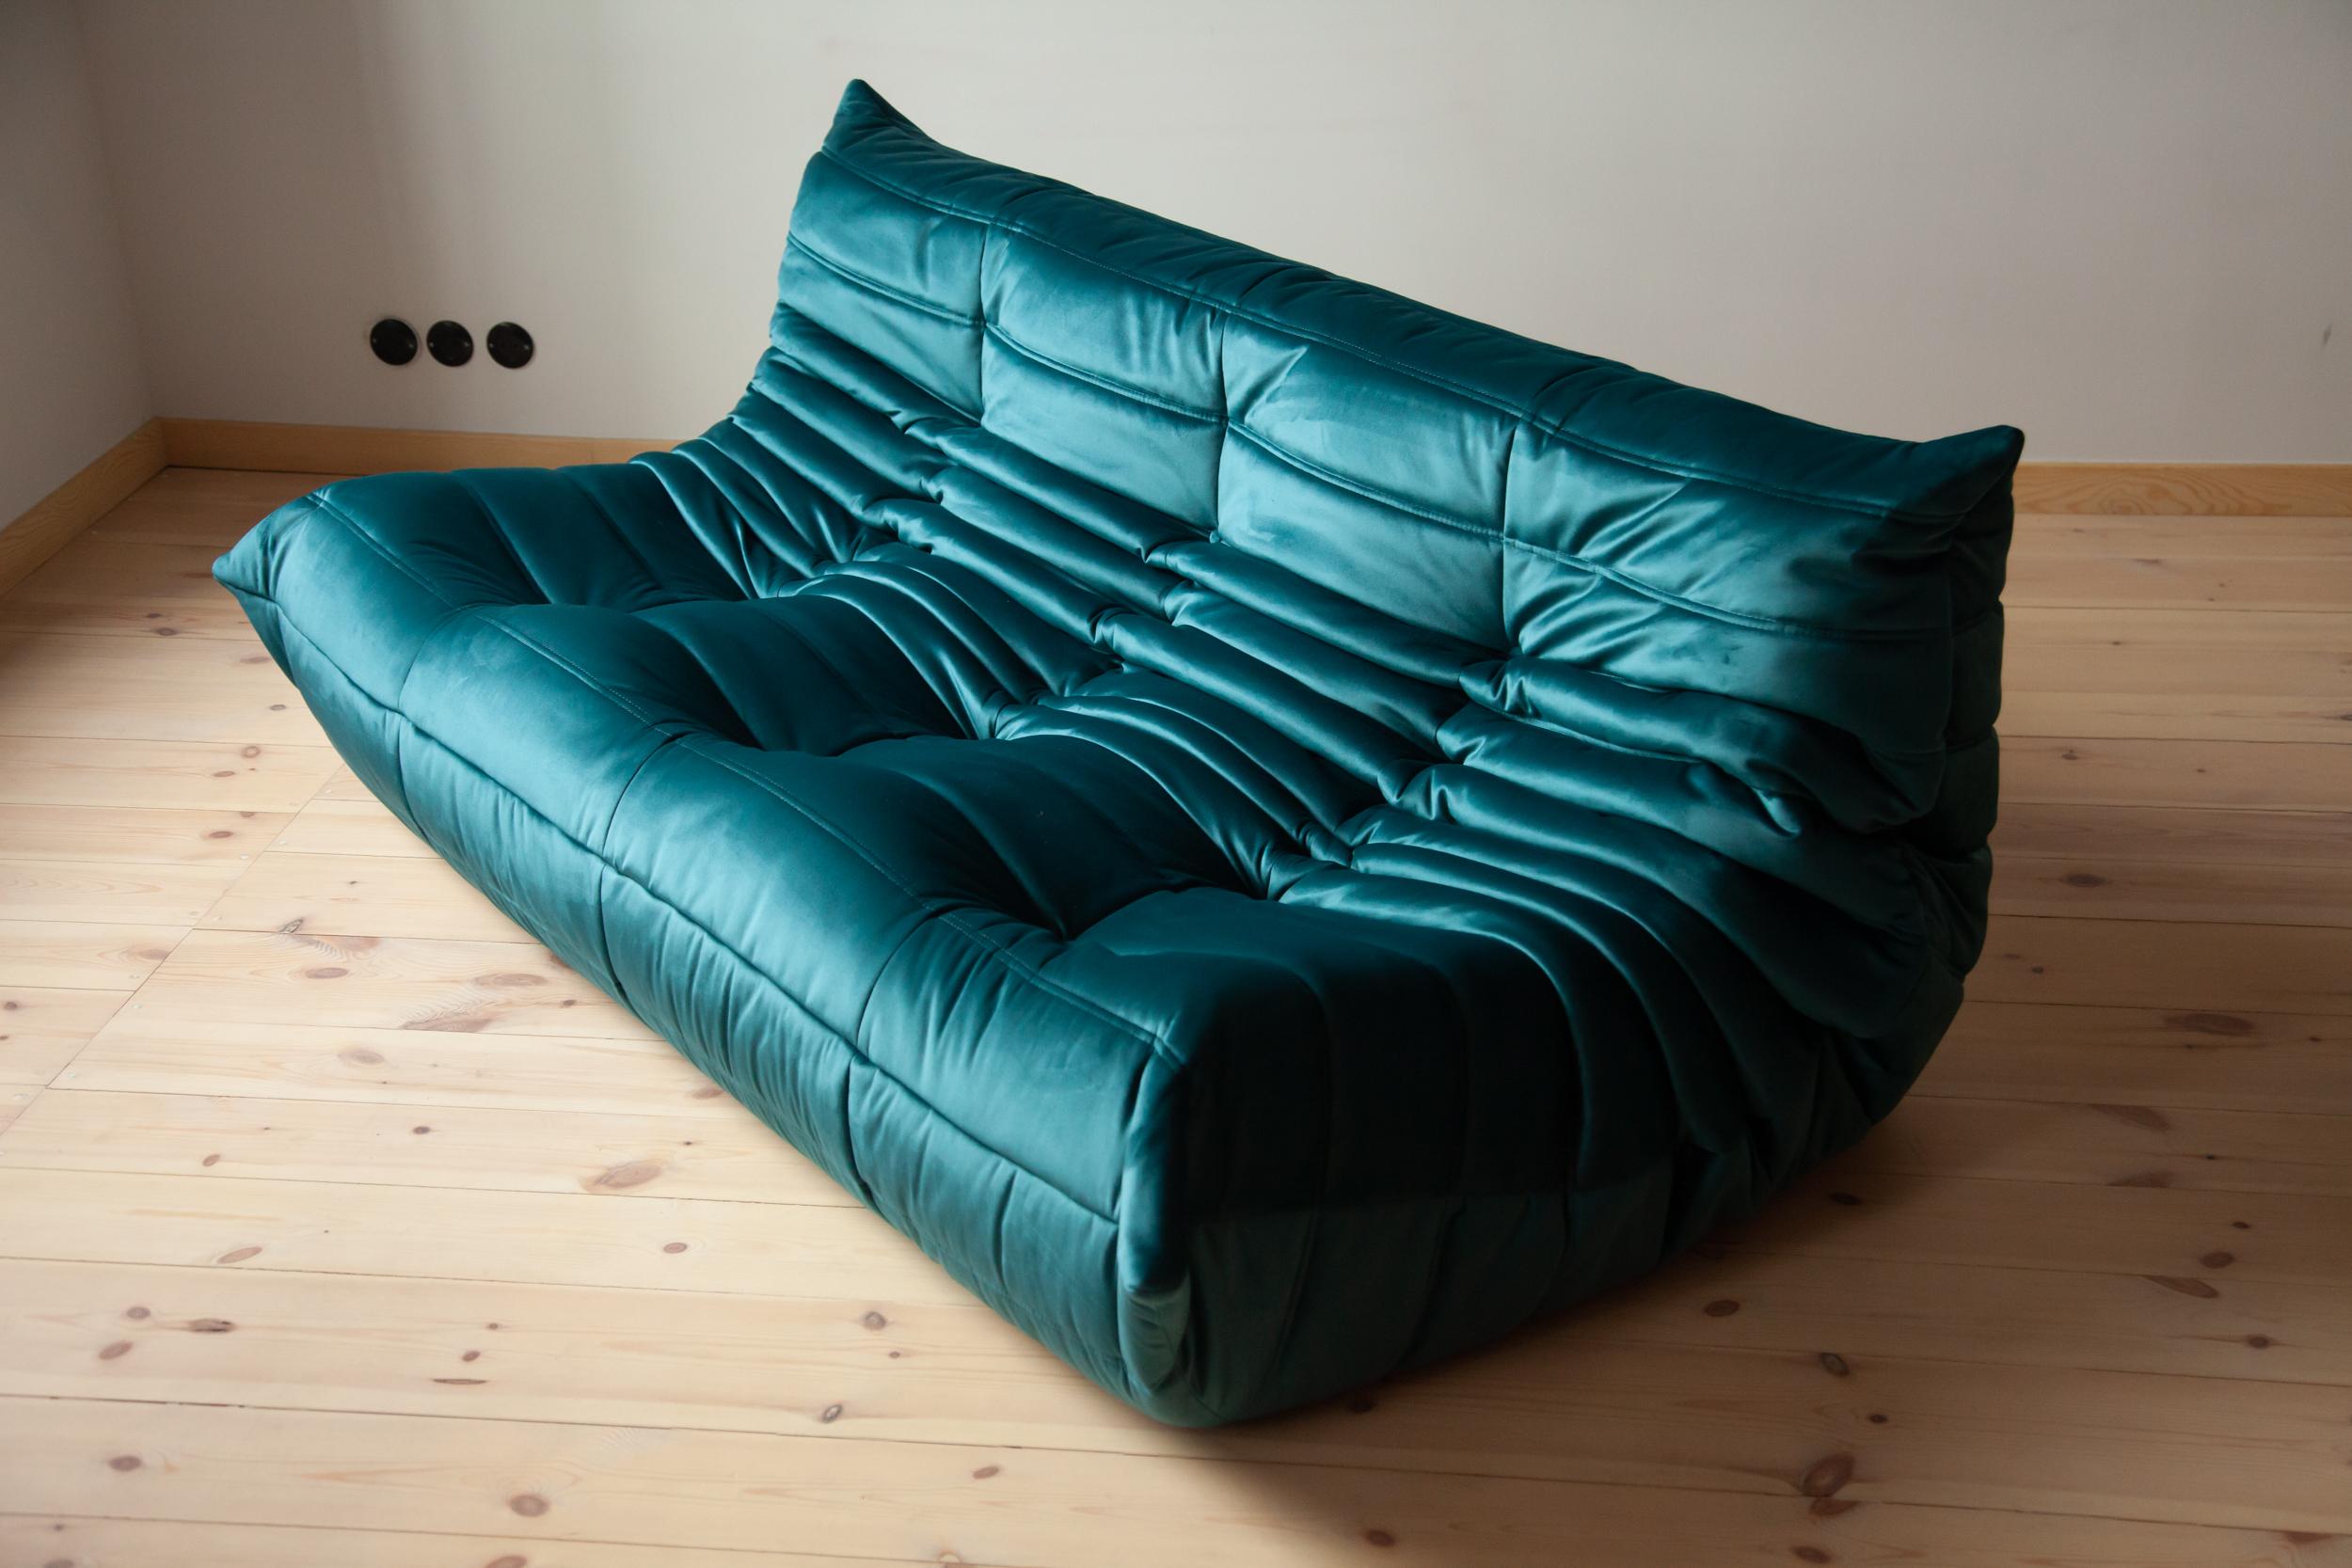 This Togo three-seat sofa was designed by Michel Ducaroy in 1973 and was manufactured by Ligne Roset in France. It has been reupholstered in new blue-green velvet (70 x 174 x 102 cm). It has the original Ligne Roset logo and genuine Ligne Roset